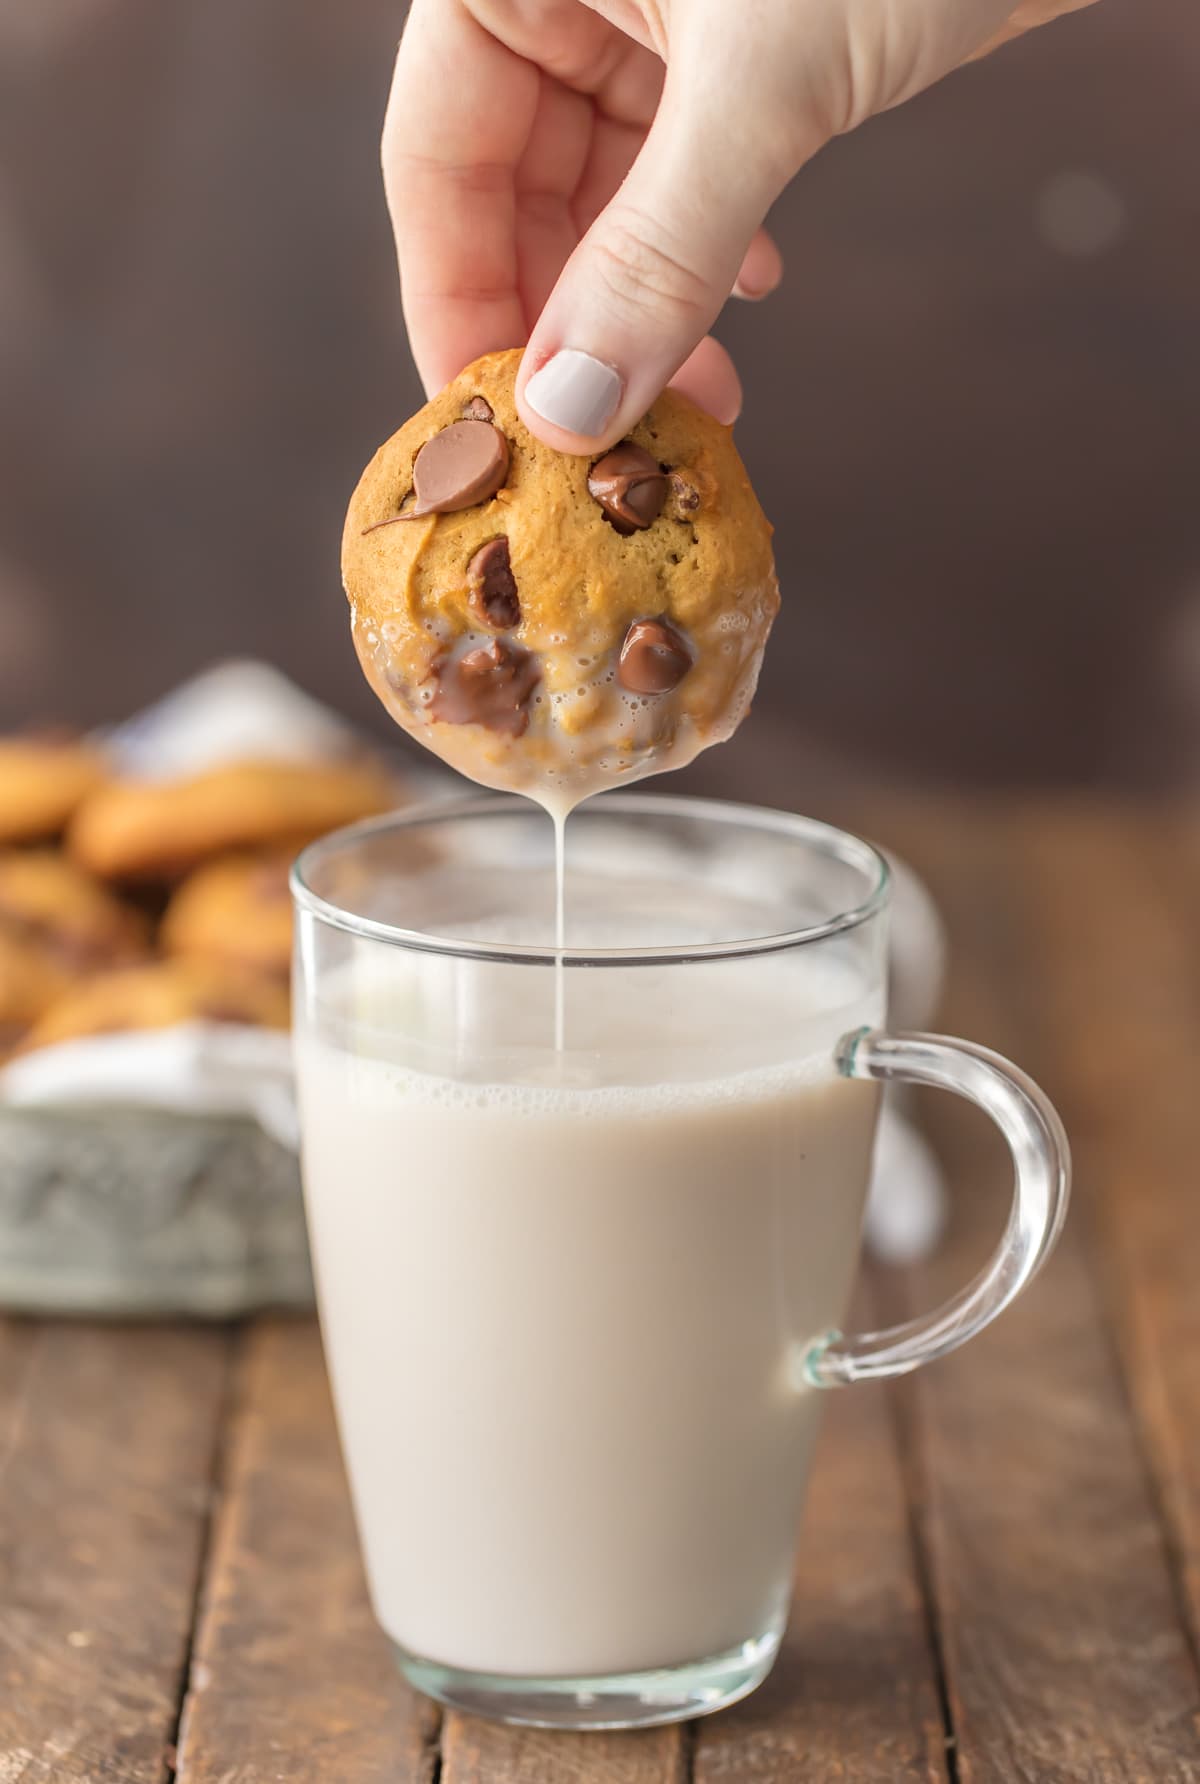 Dipping a chocolate chip cookie in a glass of milk